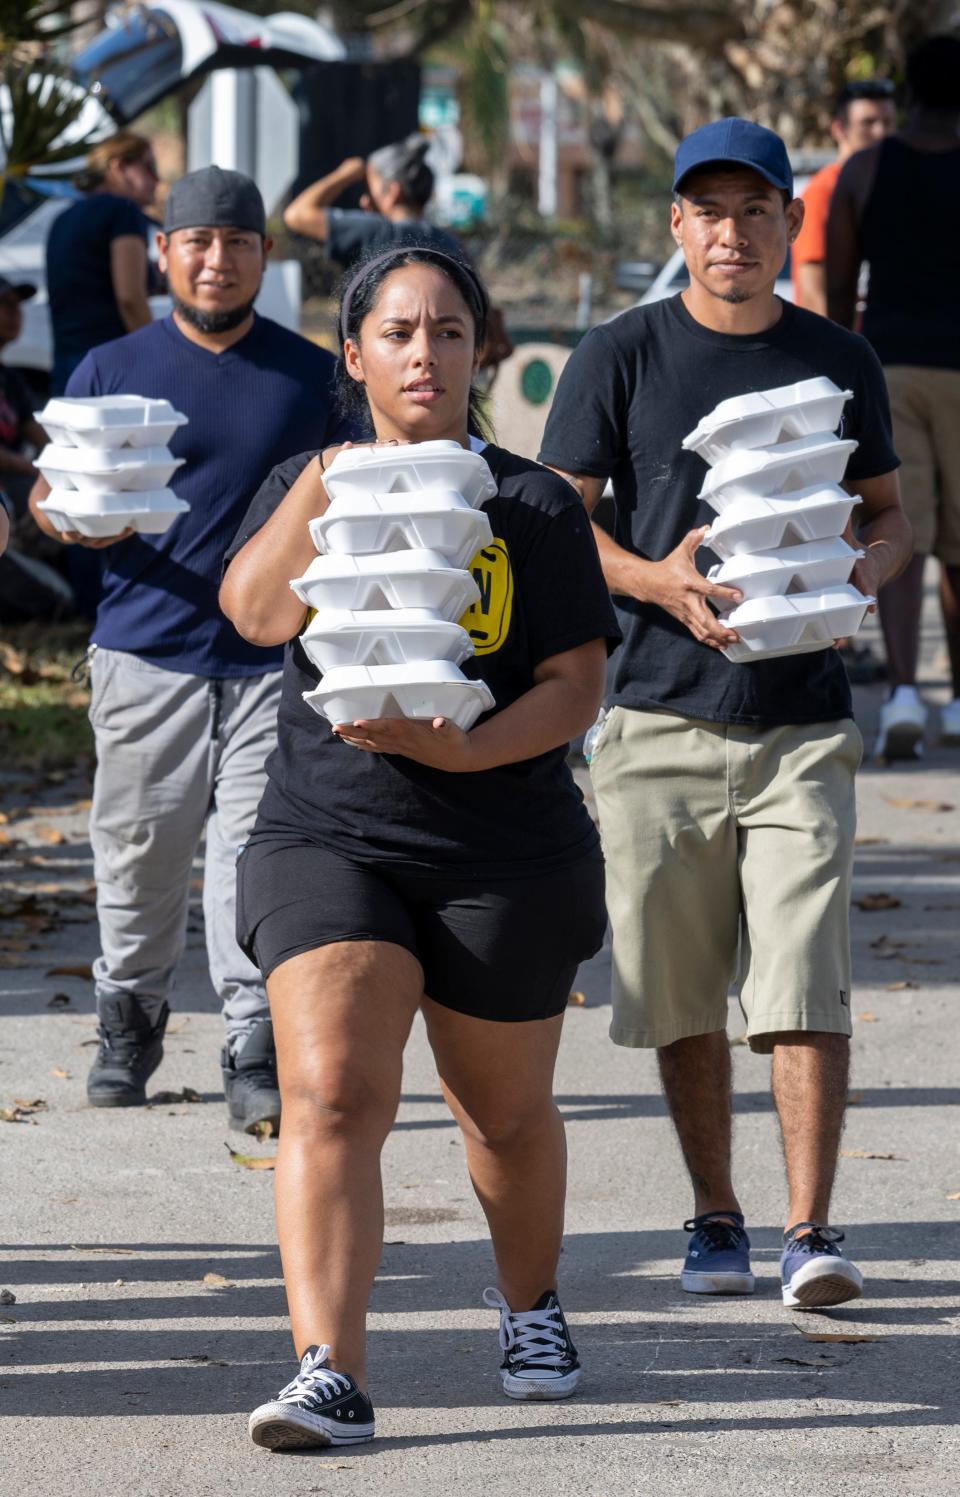 Residents of the flood-damaged Harmony Shores mobile home park in East Naples, Fla., and volunteers distribute meals to residents  on Wednesday, Oct. 5, 2022. Hurricane Ian's storm surge flooded the mobile homes.